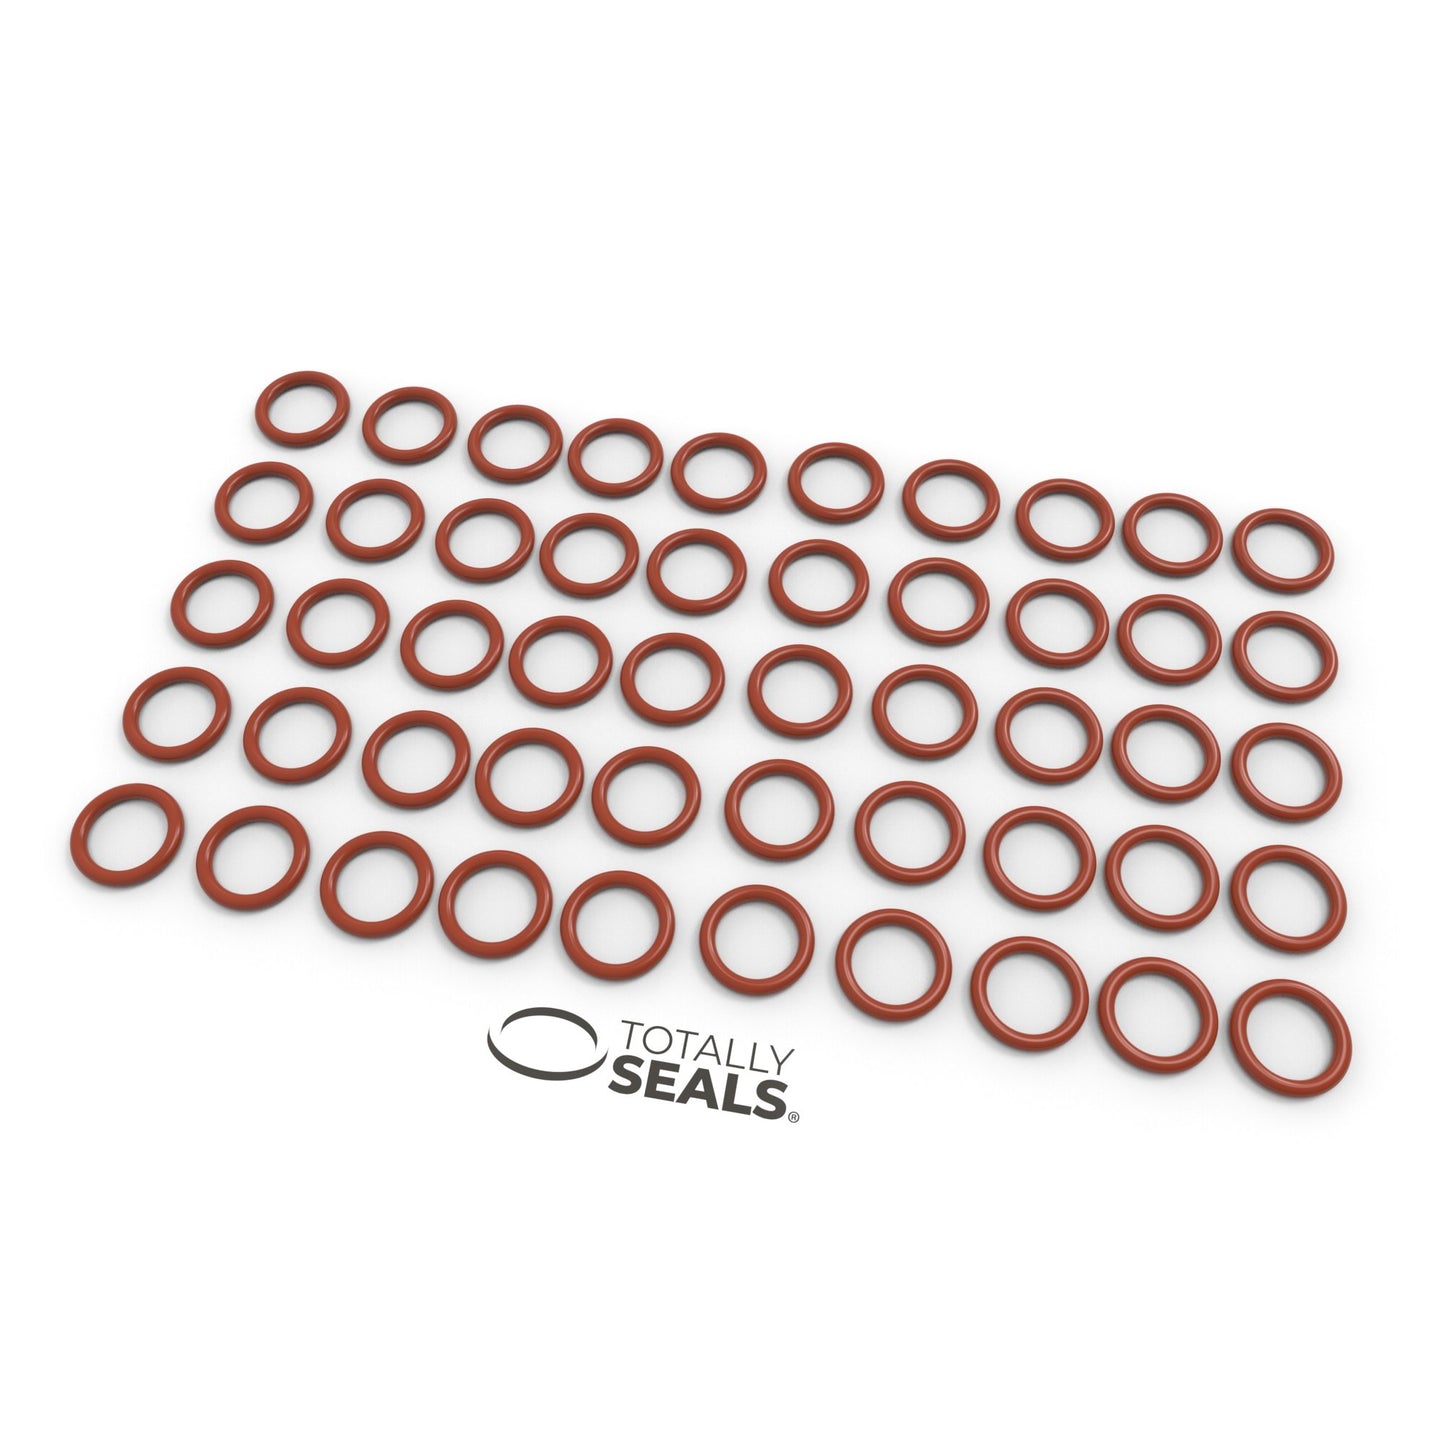 7mm x 2.5mm (12mm OD) Silicone O-Rings - Totally Seals®